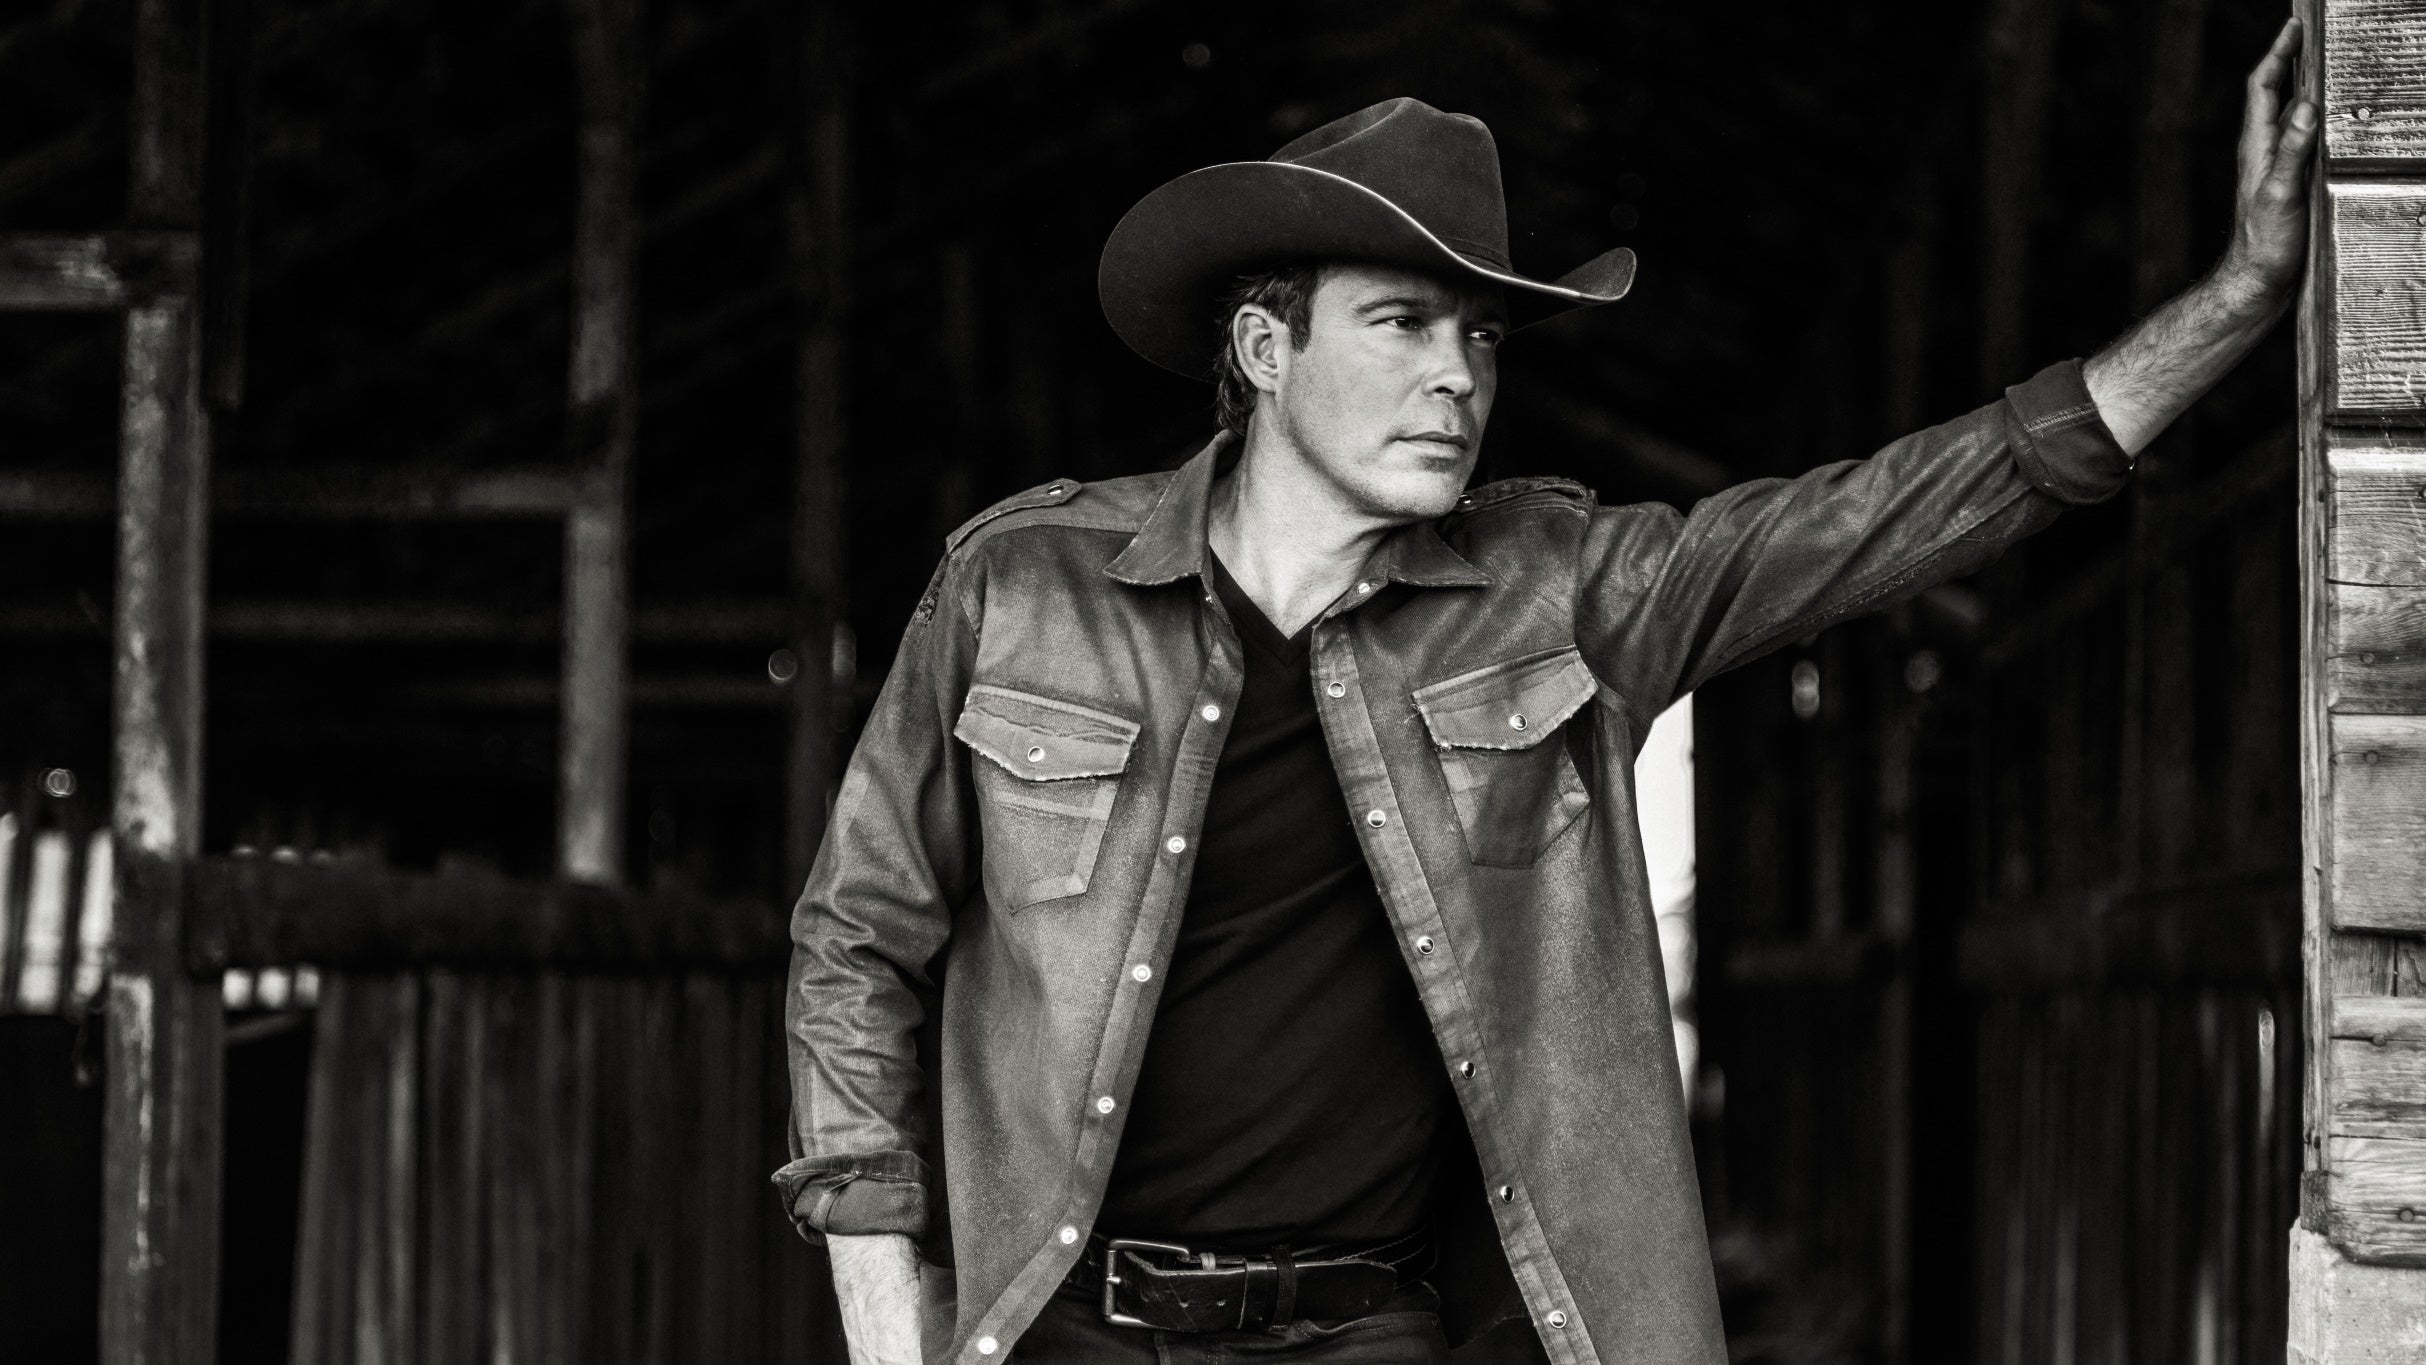 Clay Walker Country Side Tour in Cherokee promo photo for Caesars Rewards presale offer code